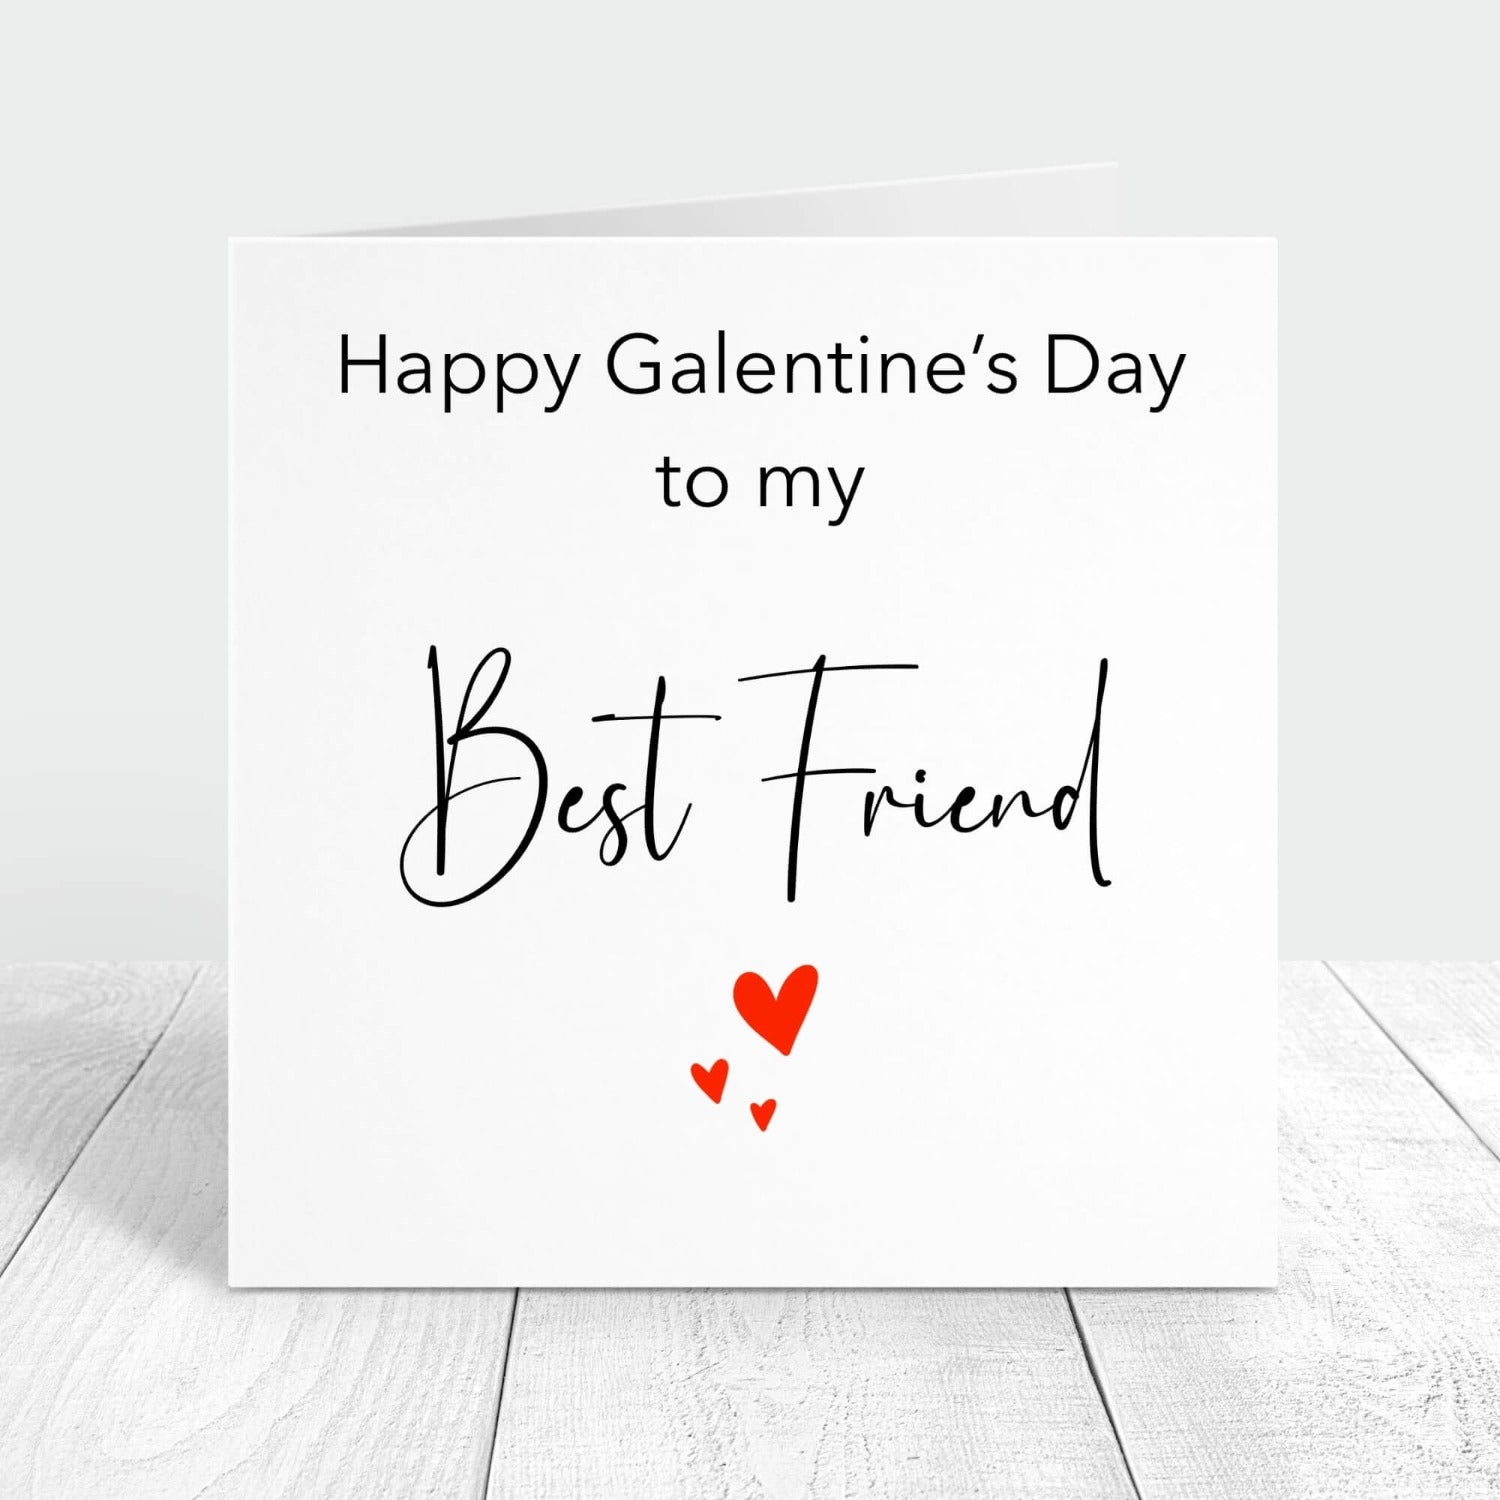 personalised happy galentine's day card to best friend